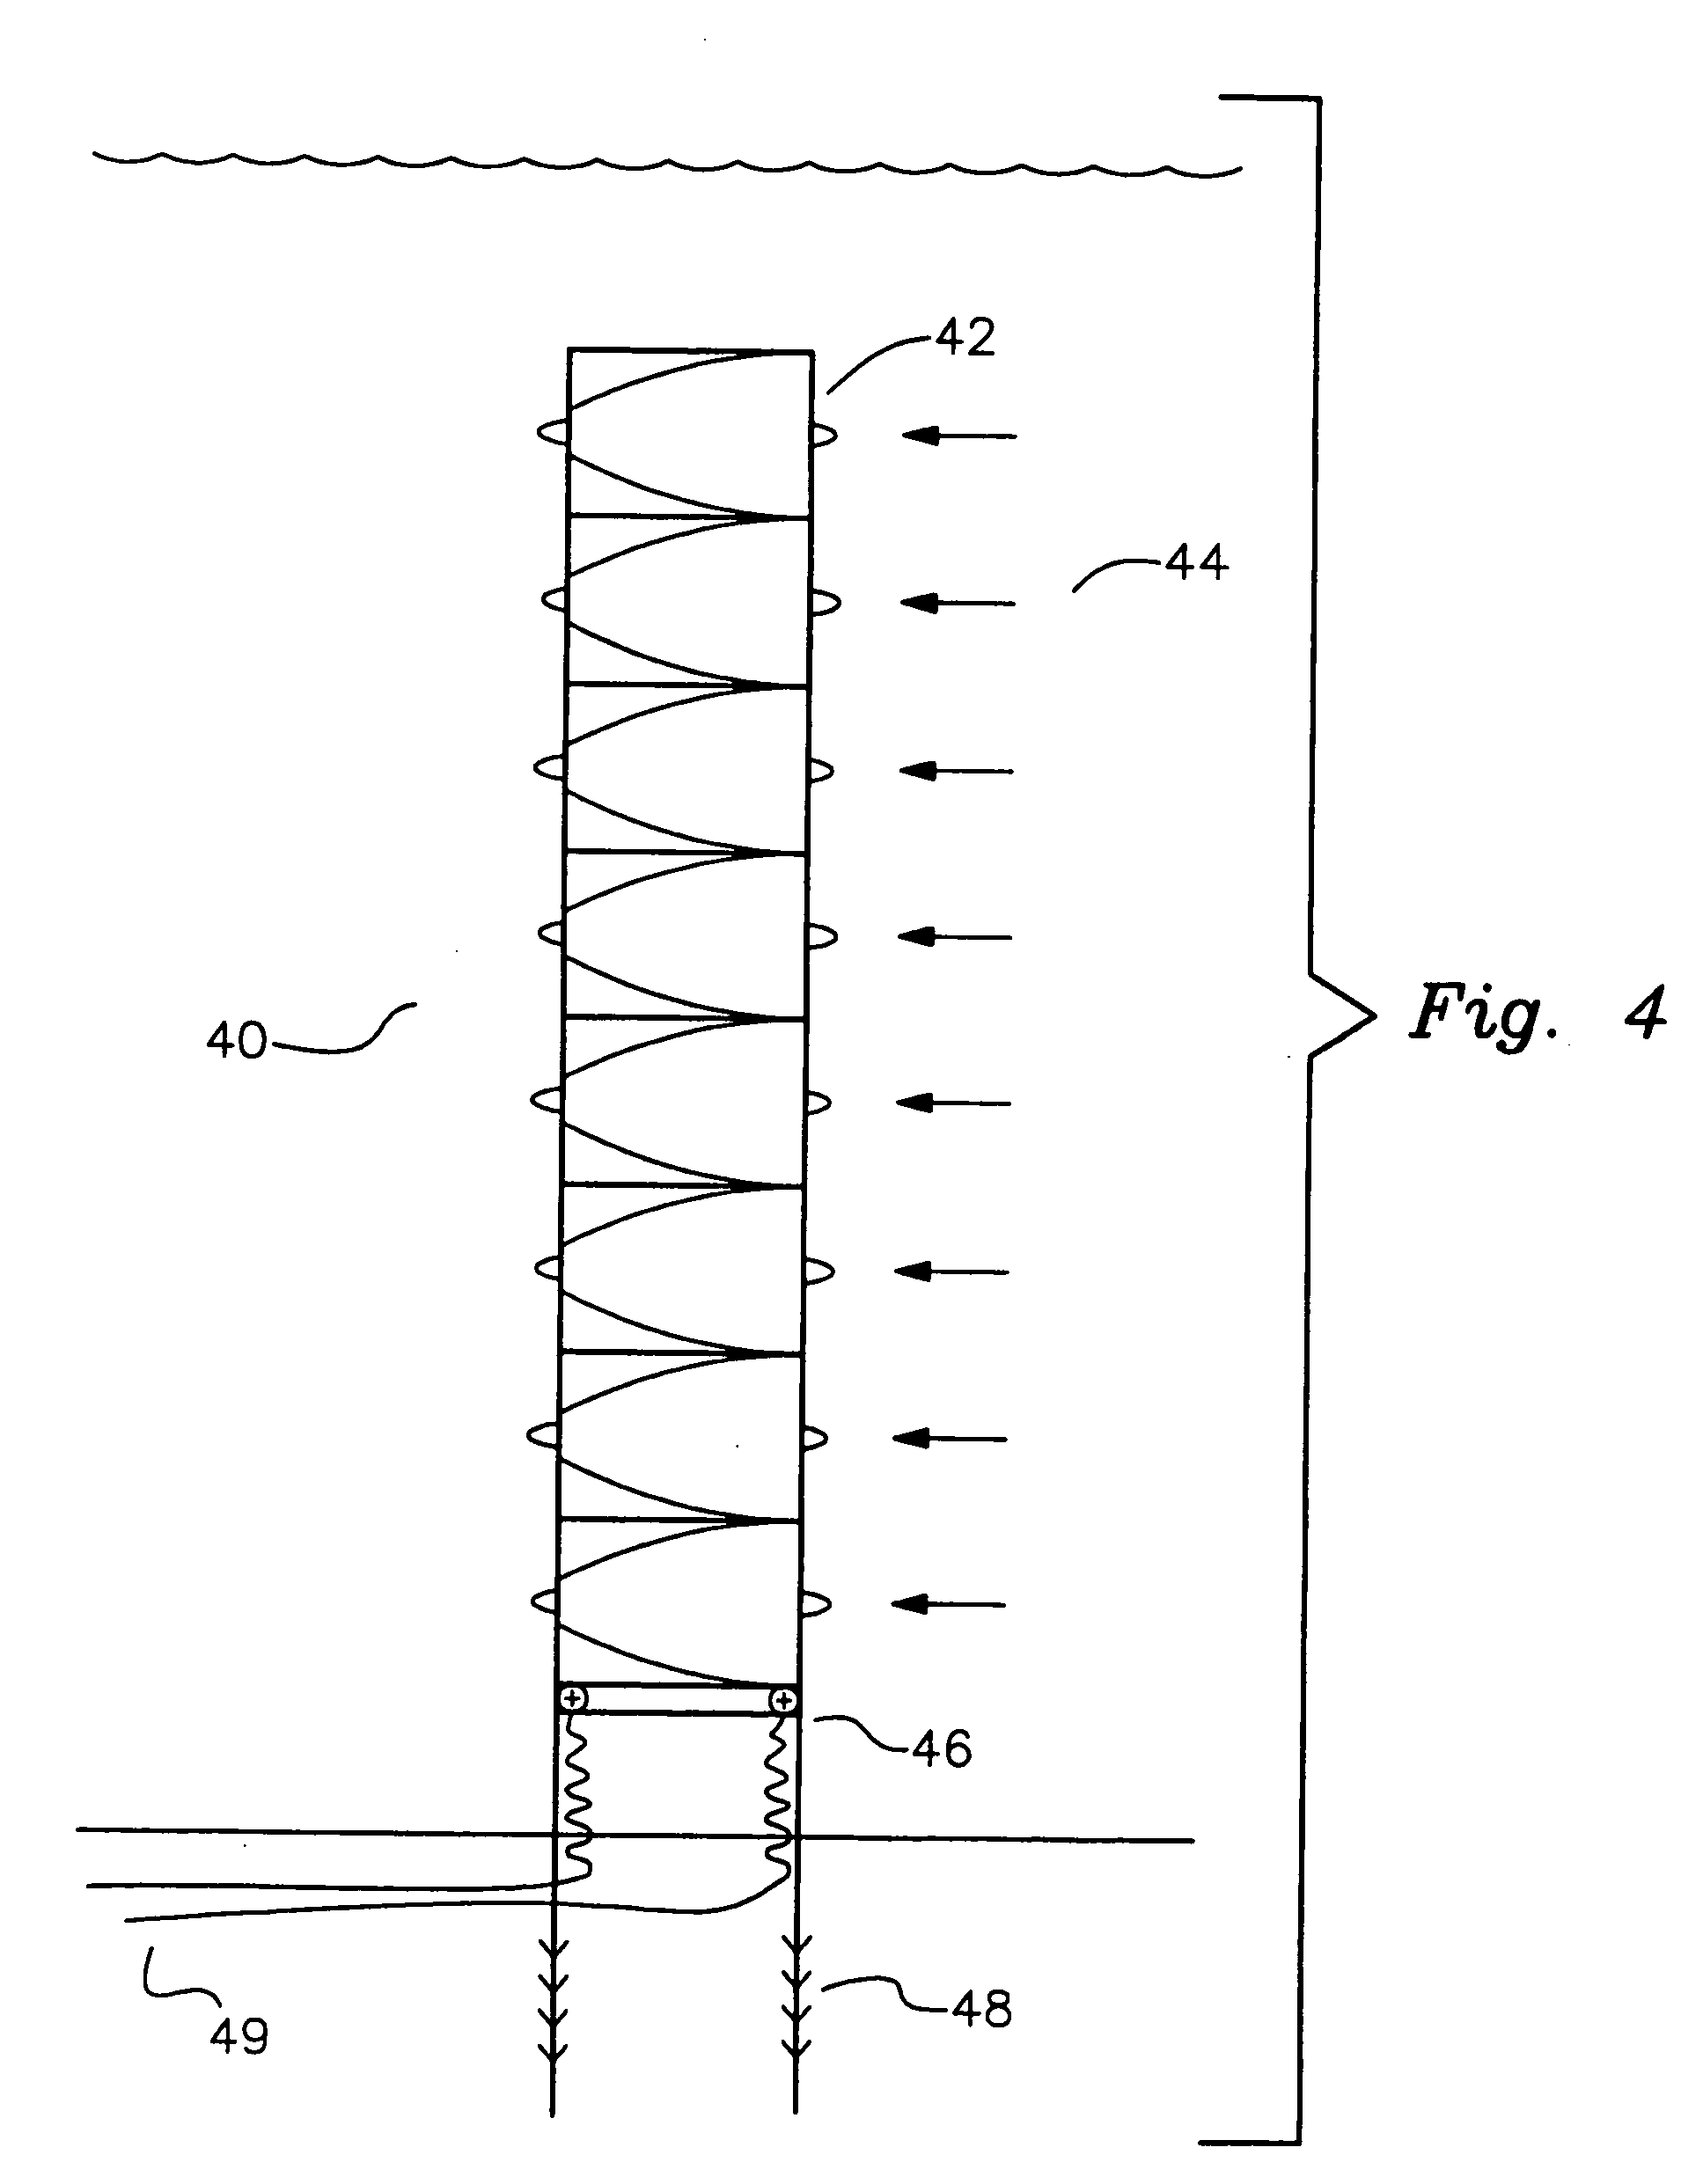 Machine and system for power generation through movement of water